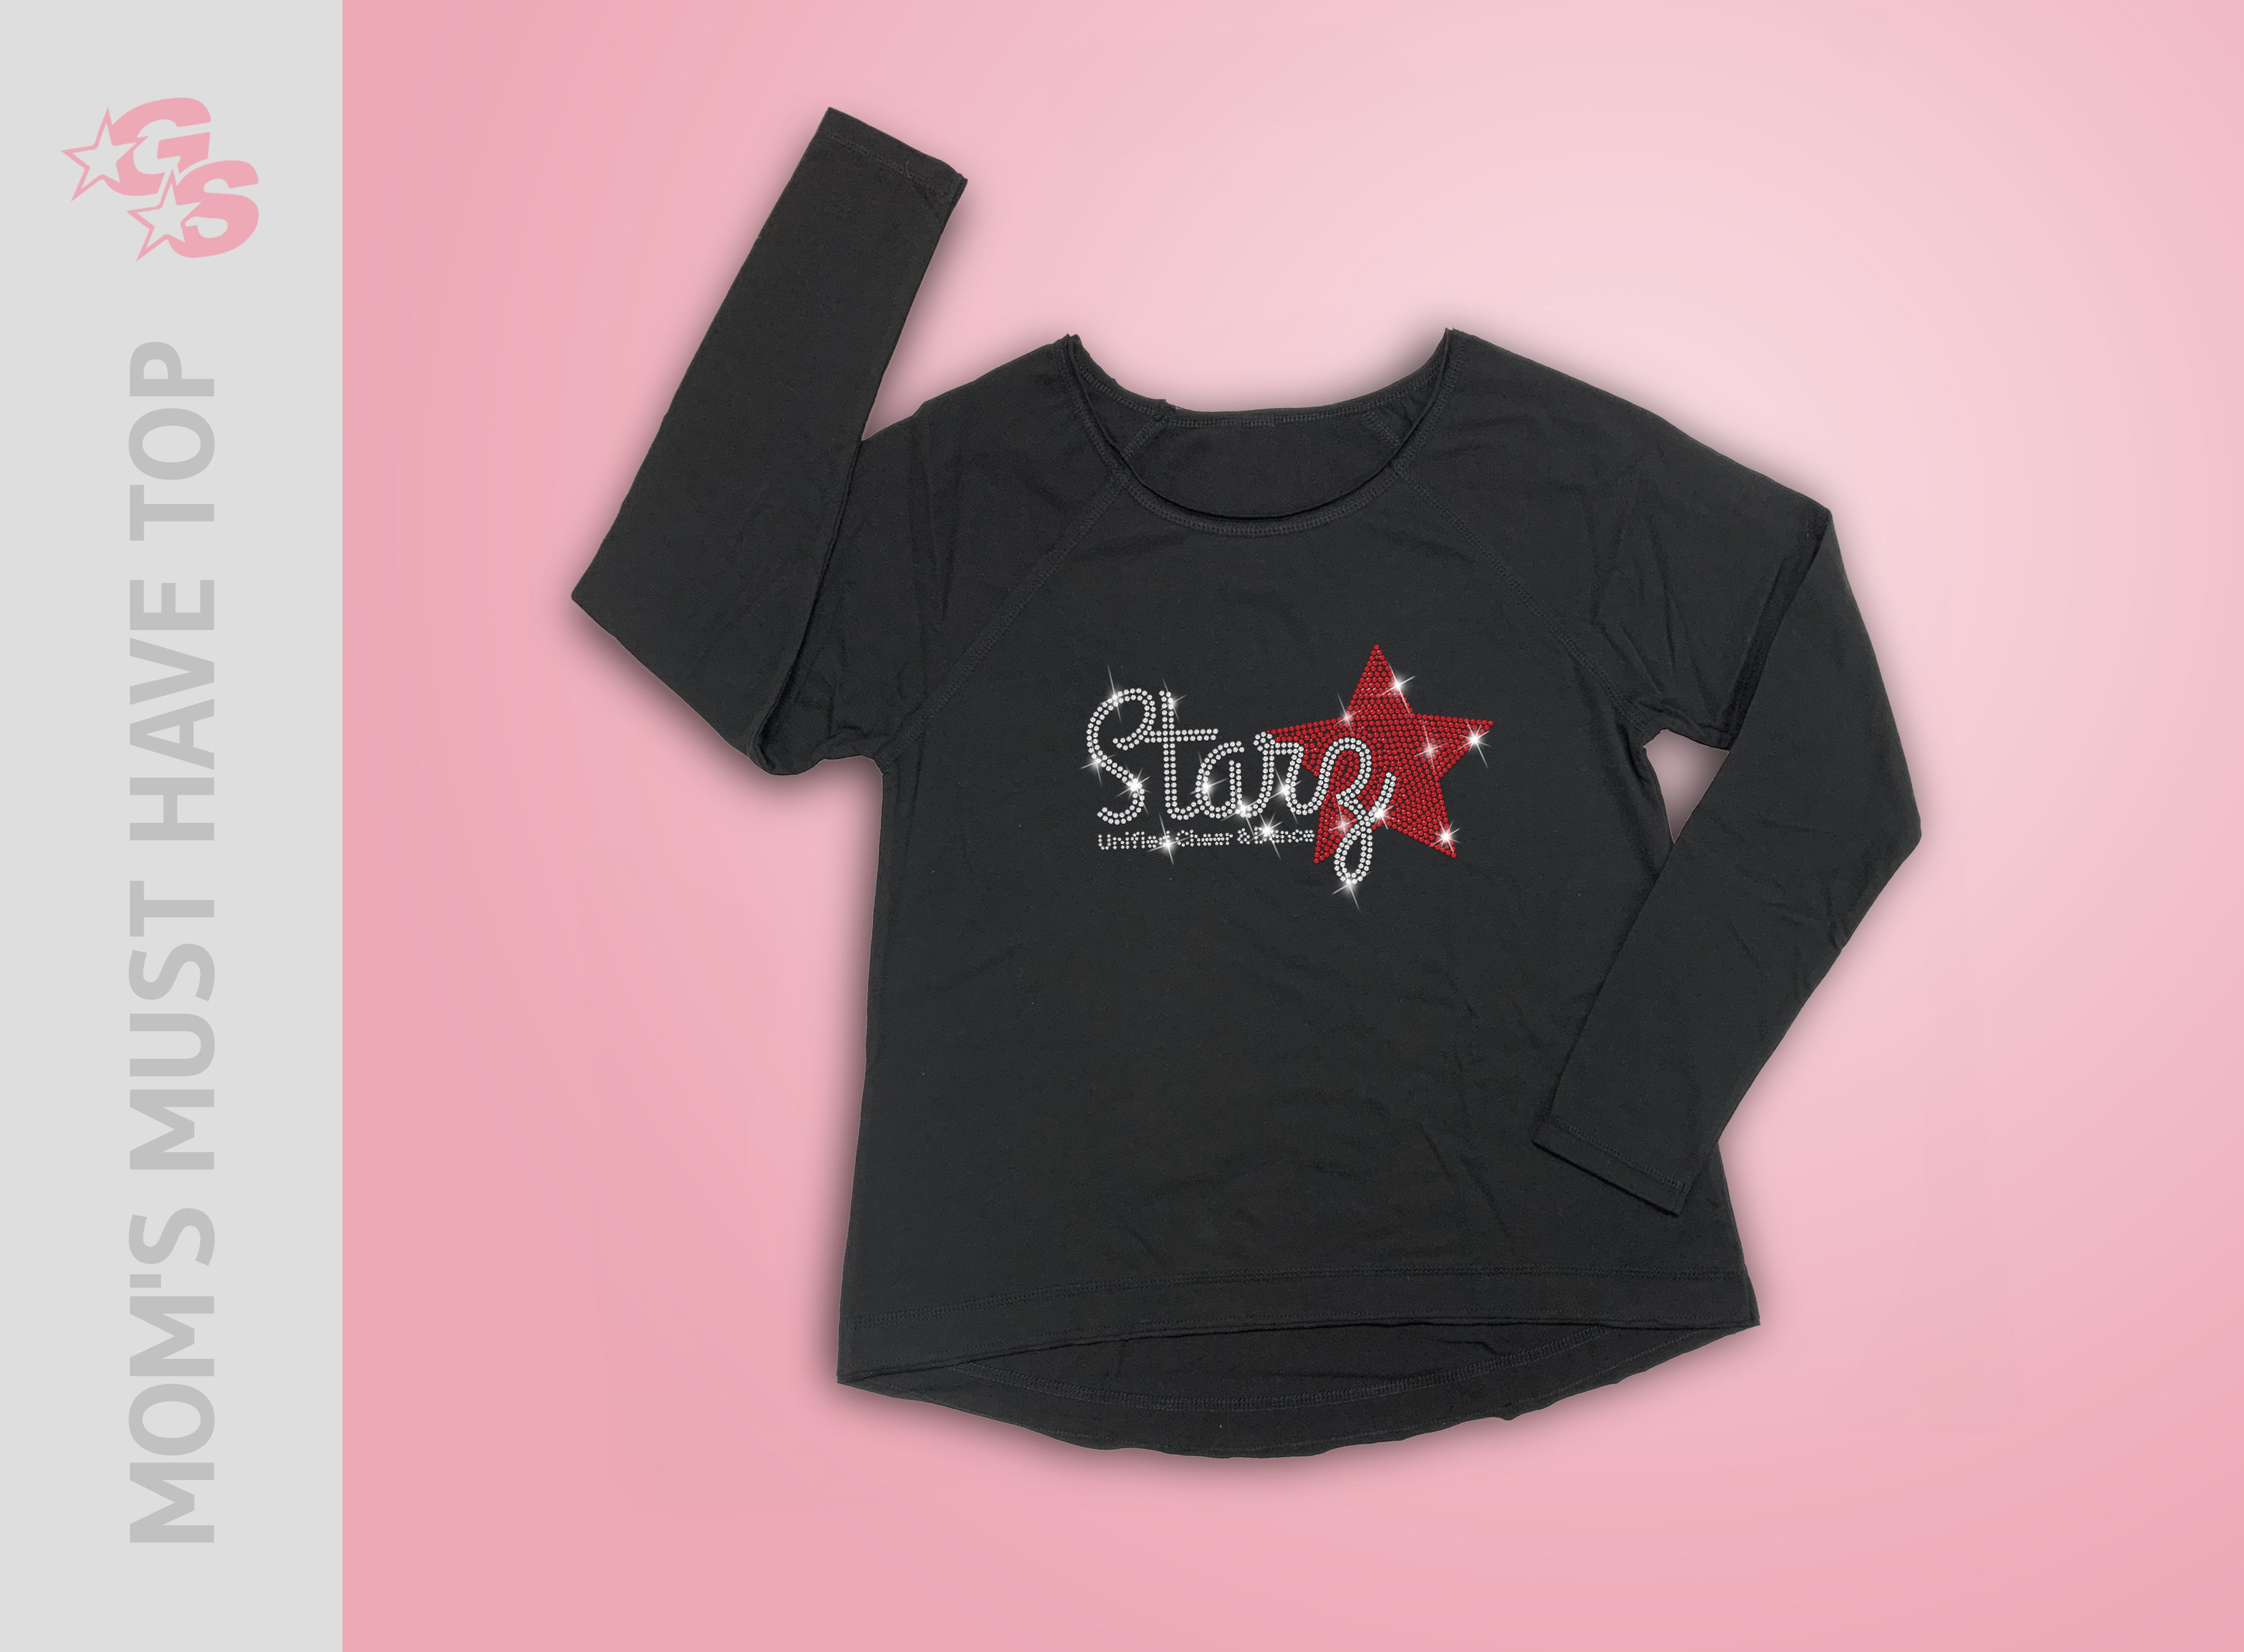 Special Olympic Starz Unified Cheer and Dance Mom's Must Have Top